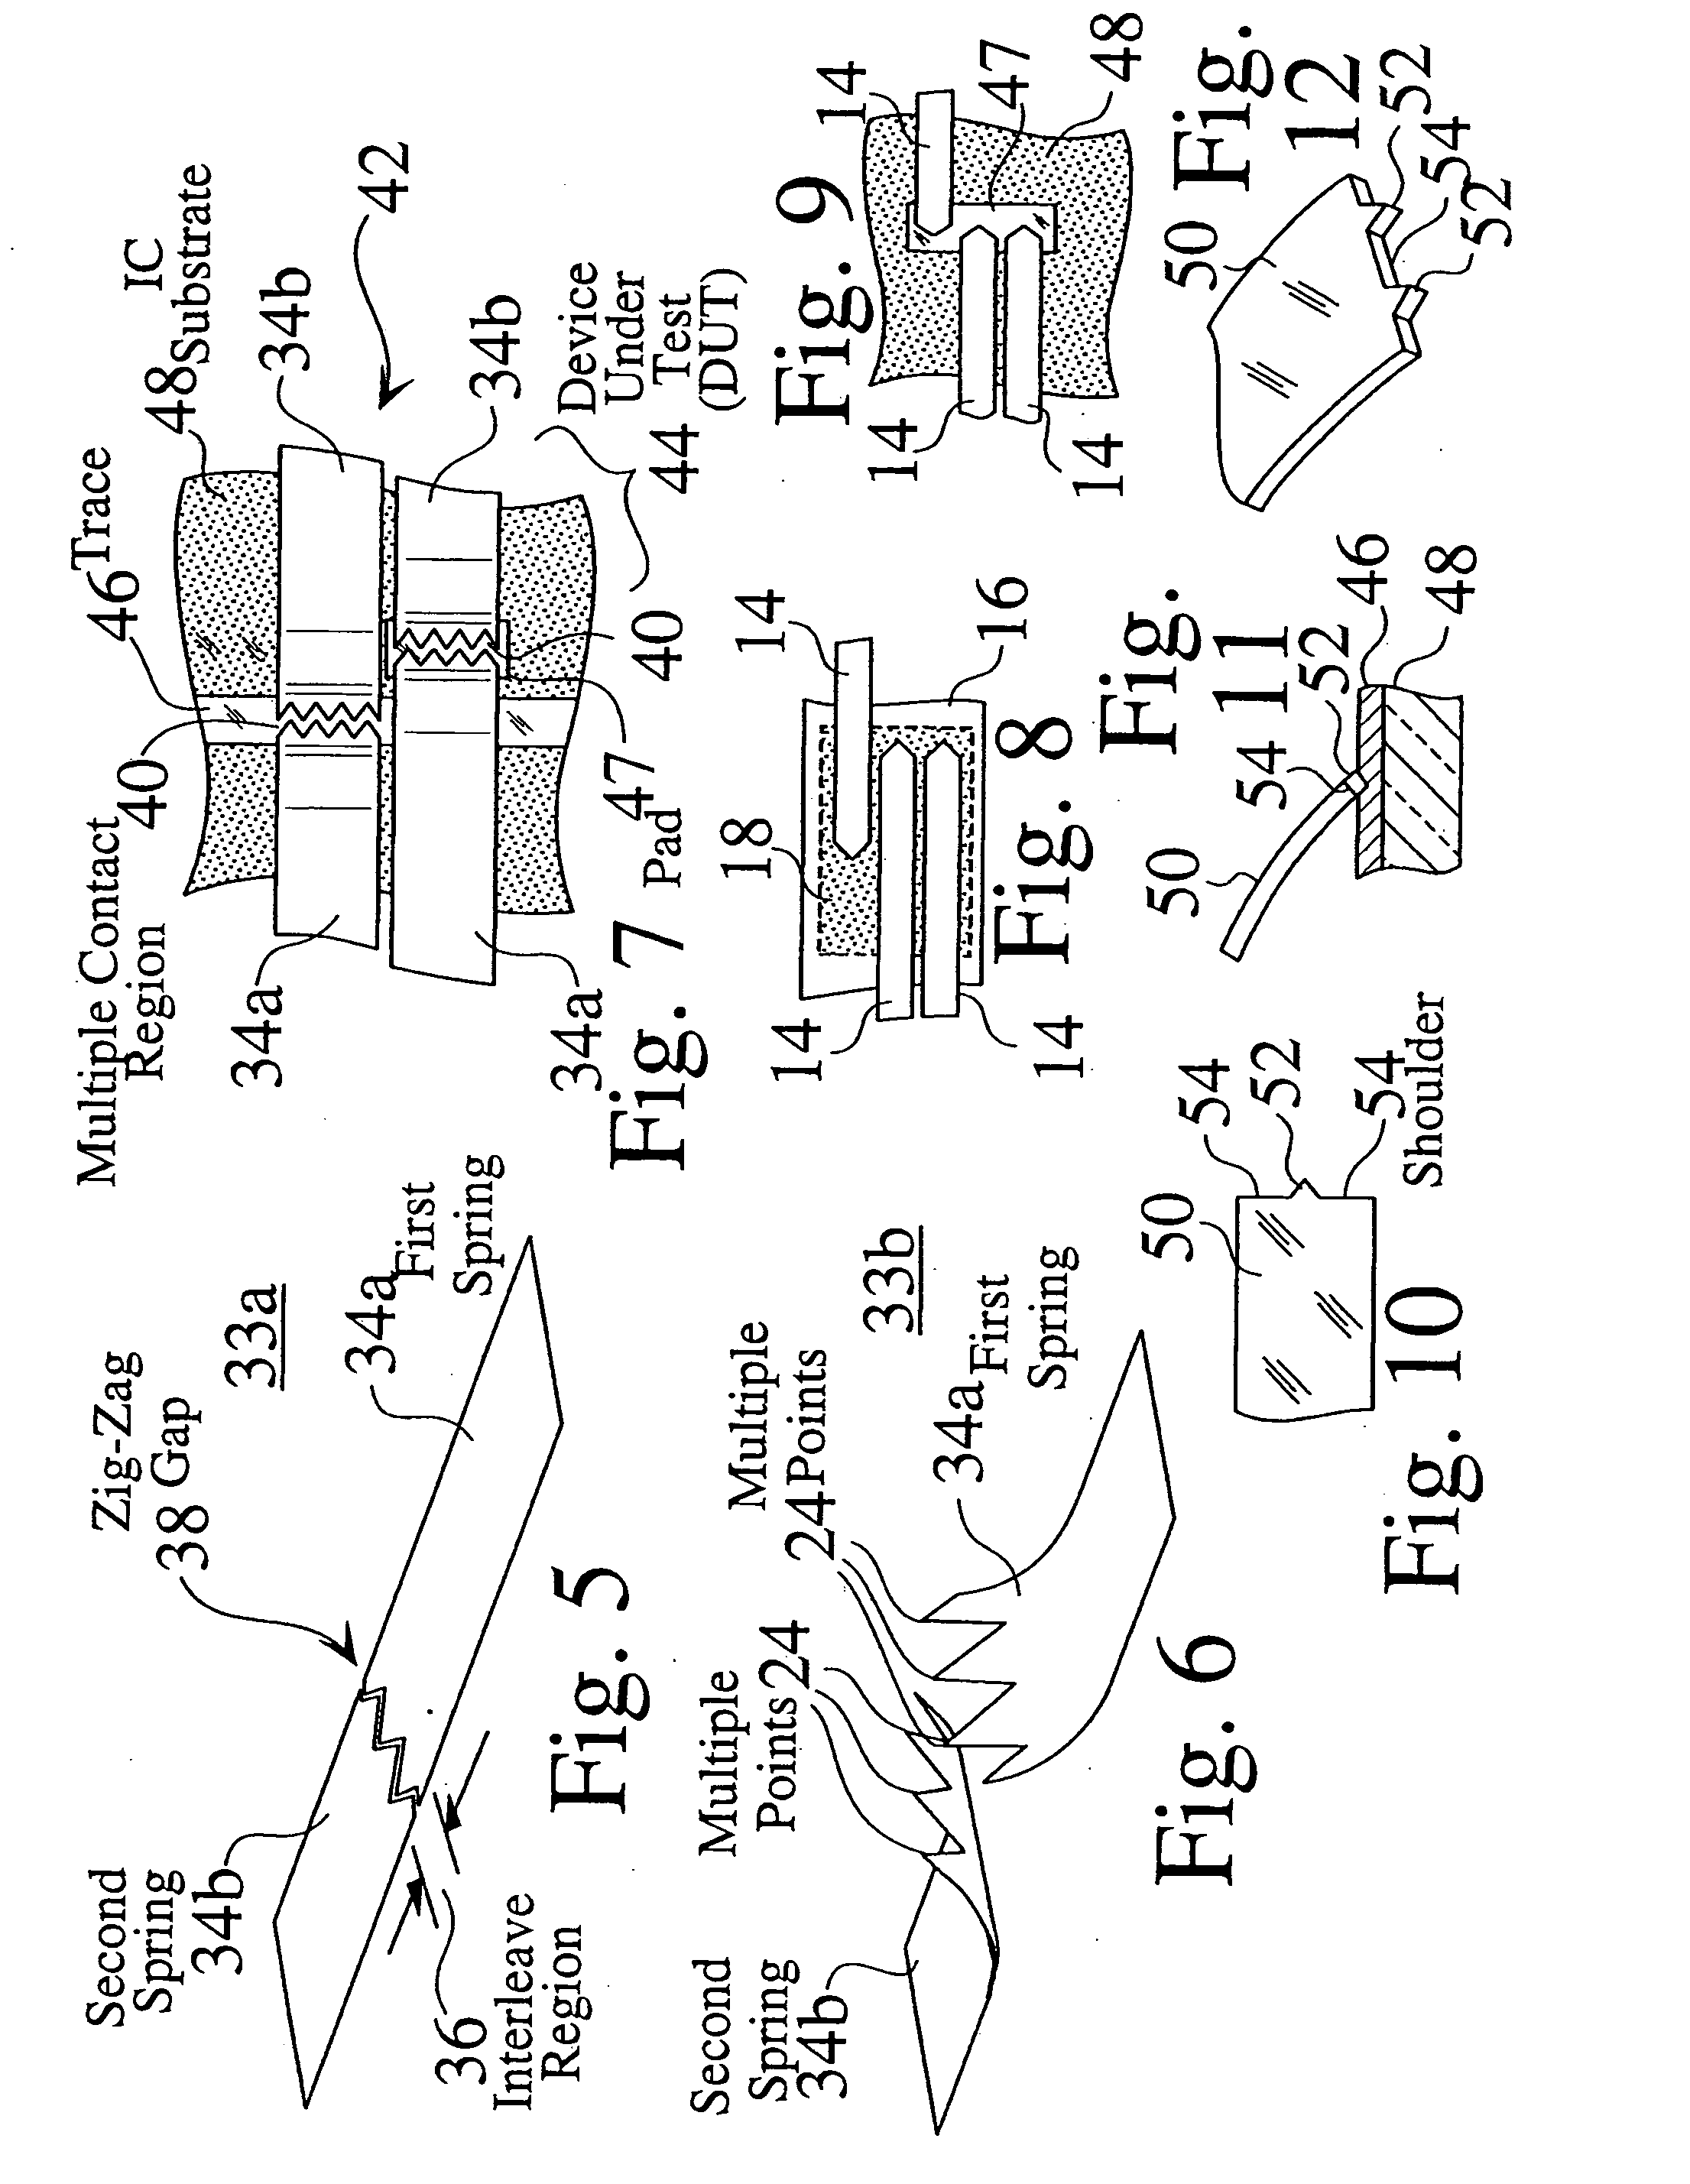 Systems for testing and packaging integrated circuits